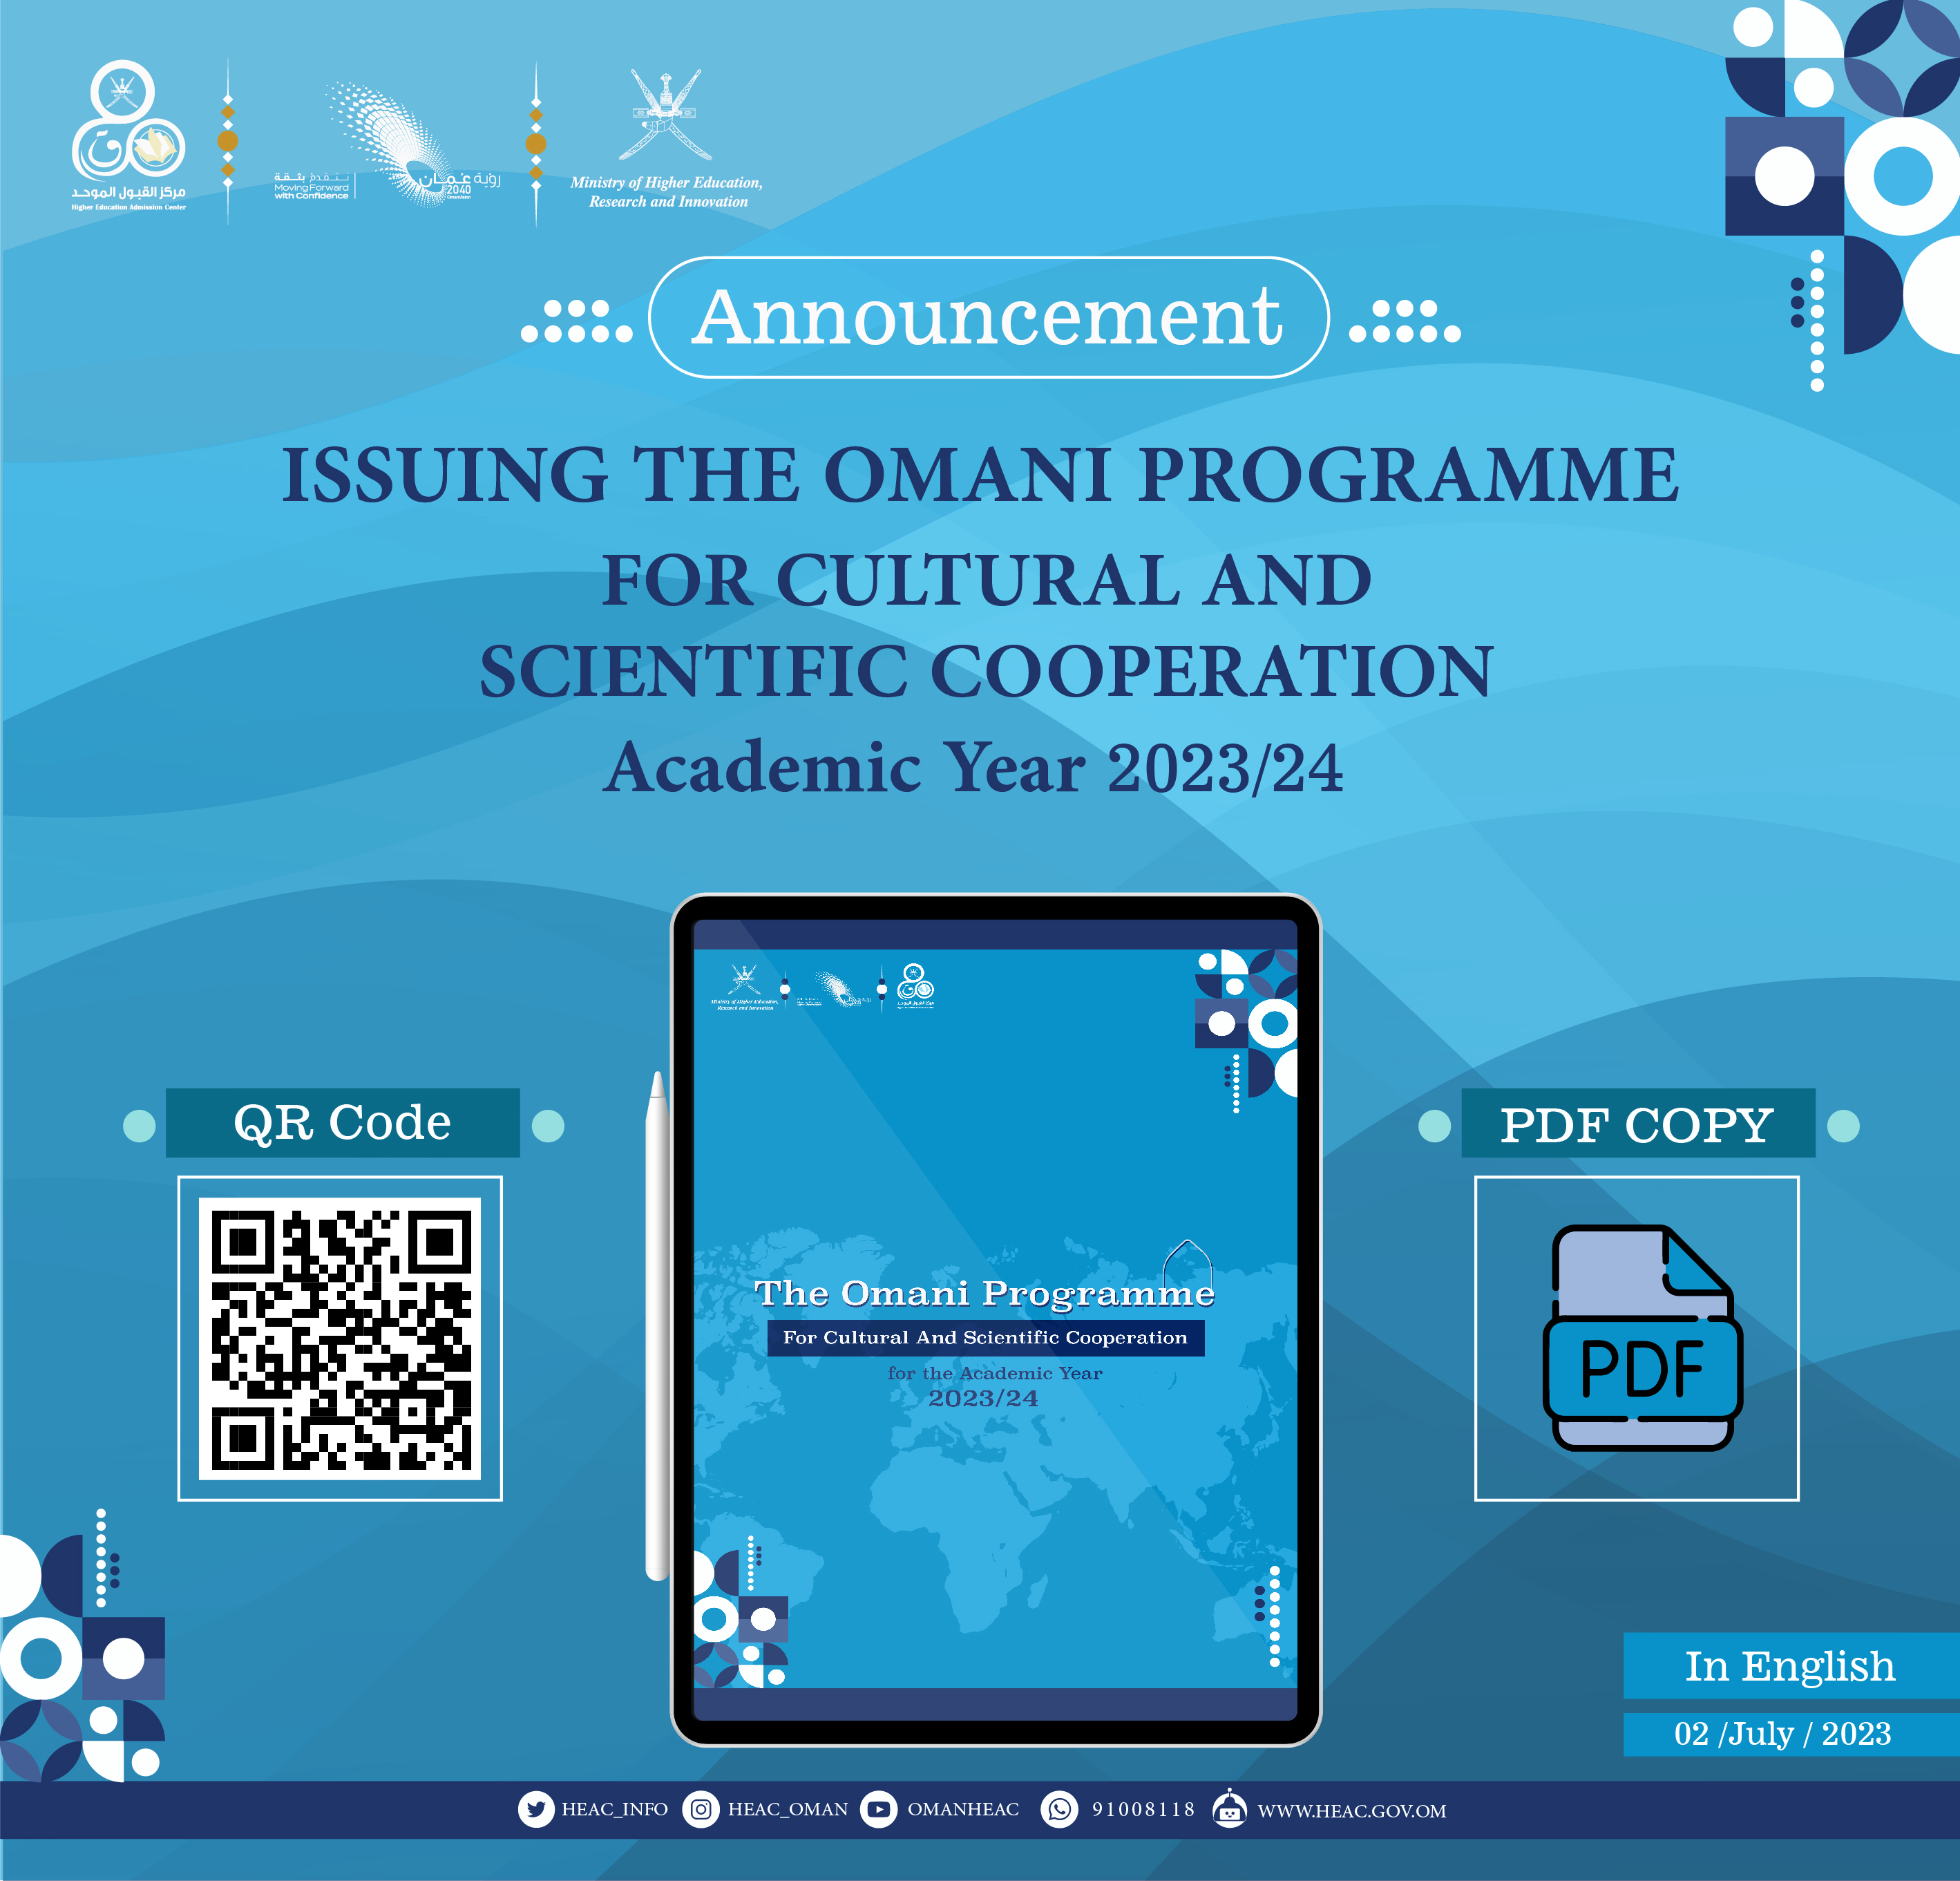 Issues the Omani programme for Cultural and Scientific Cooperation foe academic year 2023/2024